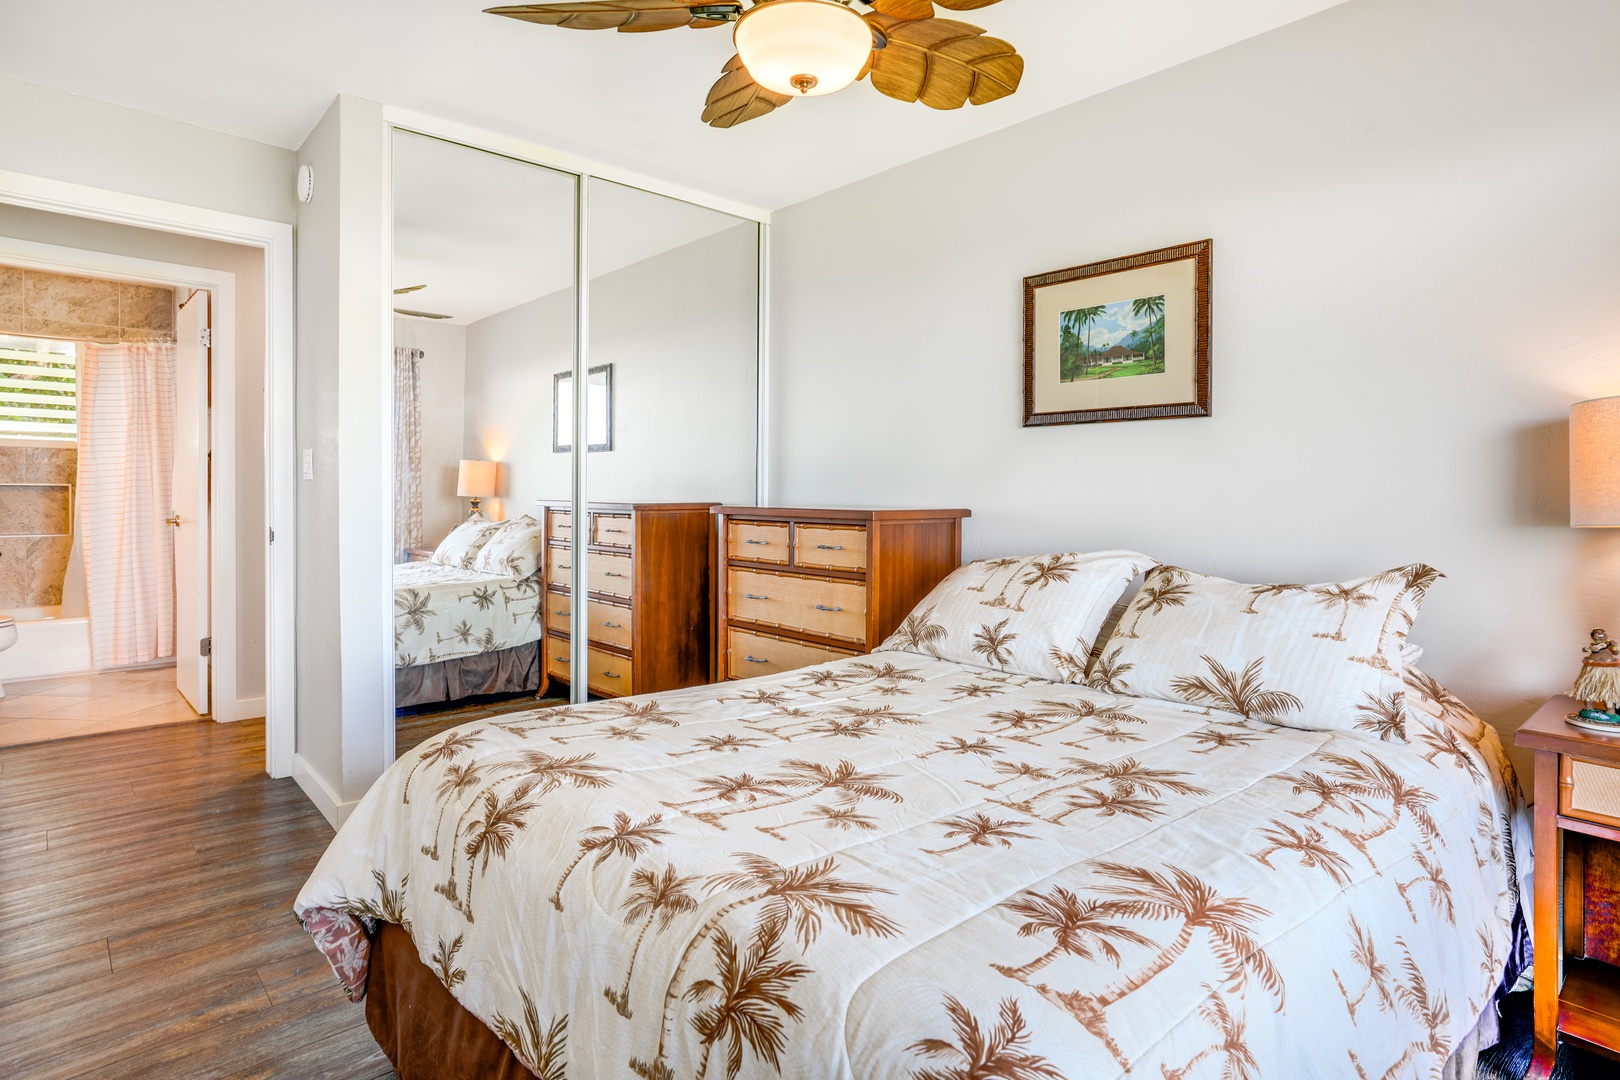 Princeville Vacation Rentals, Alii Kai 7201 - Reflecting comfort and style, this bedroom boasts a large mirrored closet for your getaway gear.